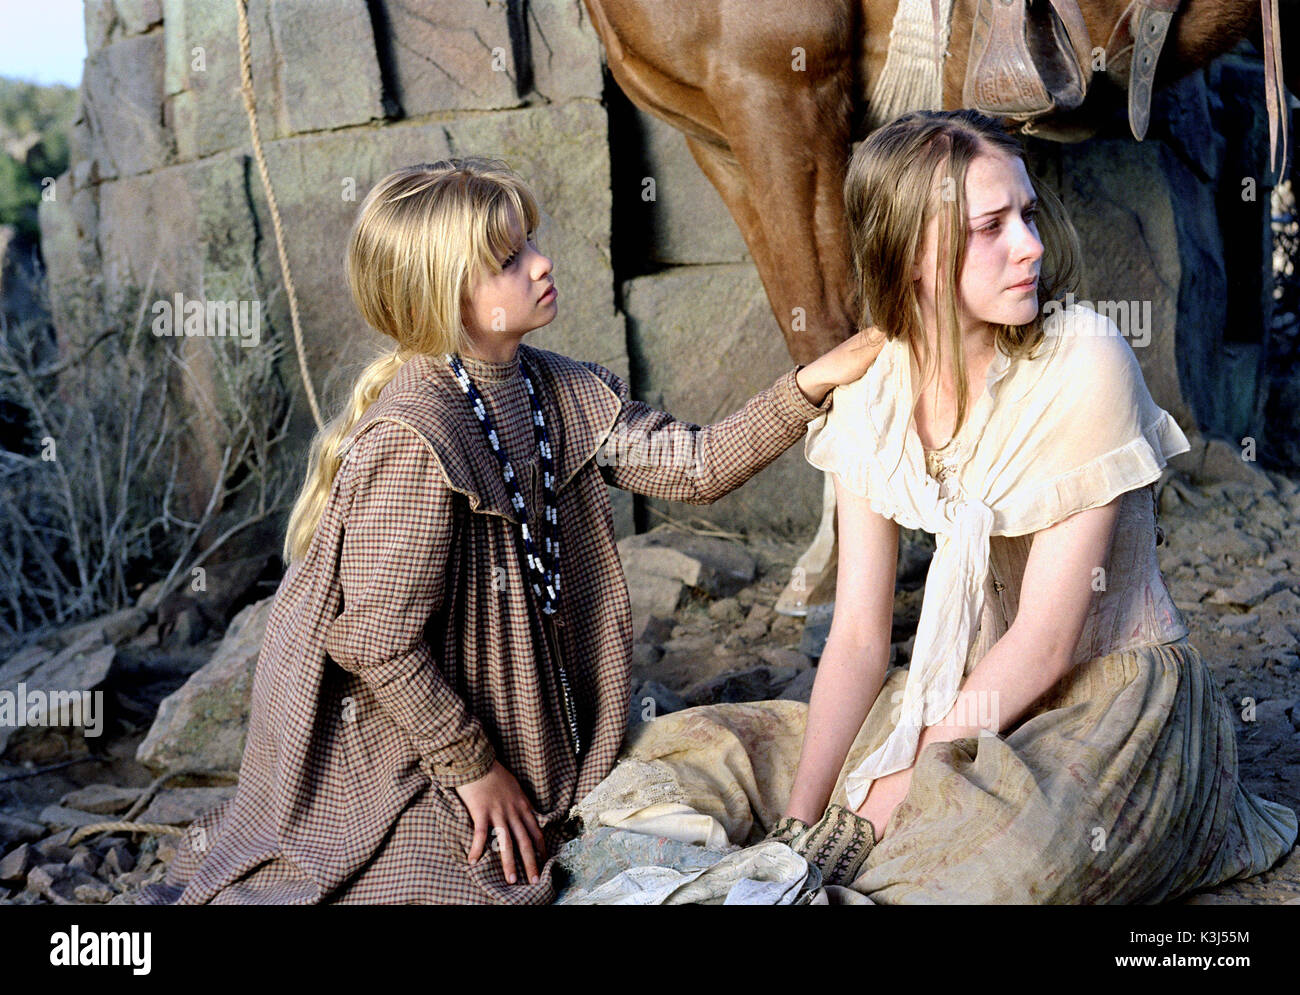 Picture 012 THE MISSING JENNA BOYD, RACHEL EVAN WOOD     Date: 2003 Stock Photo